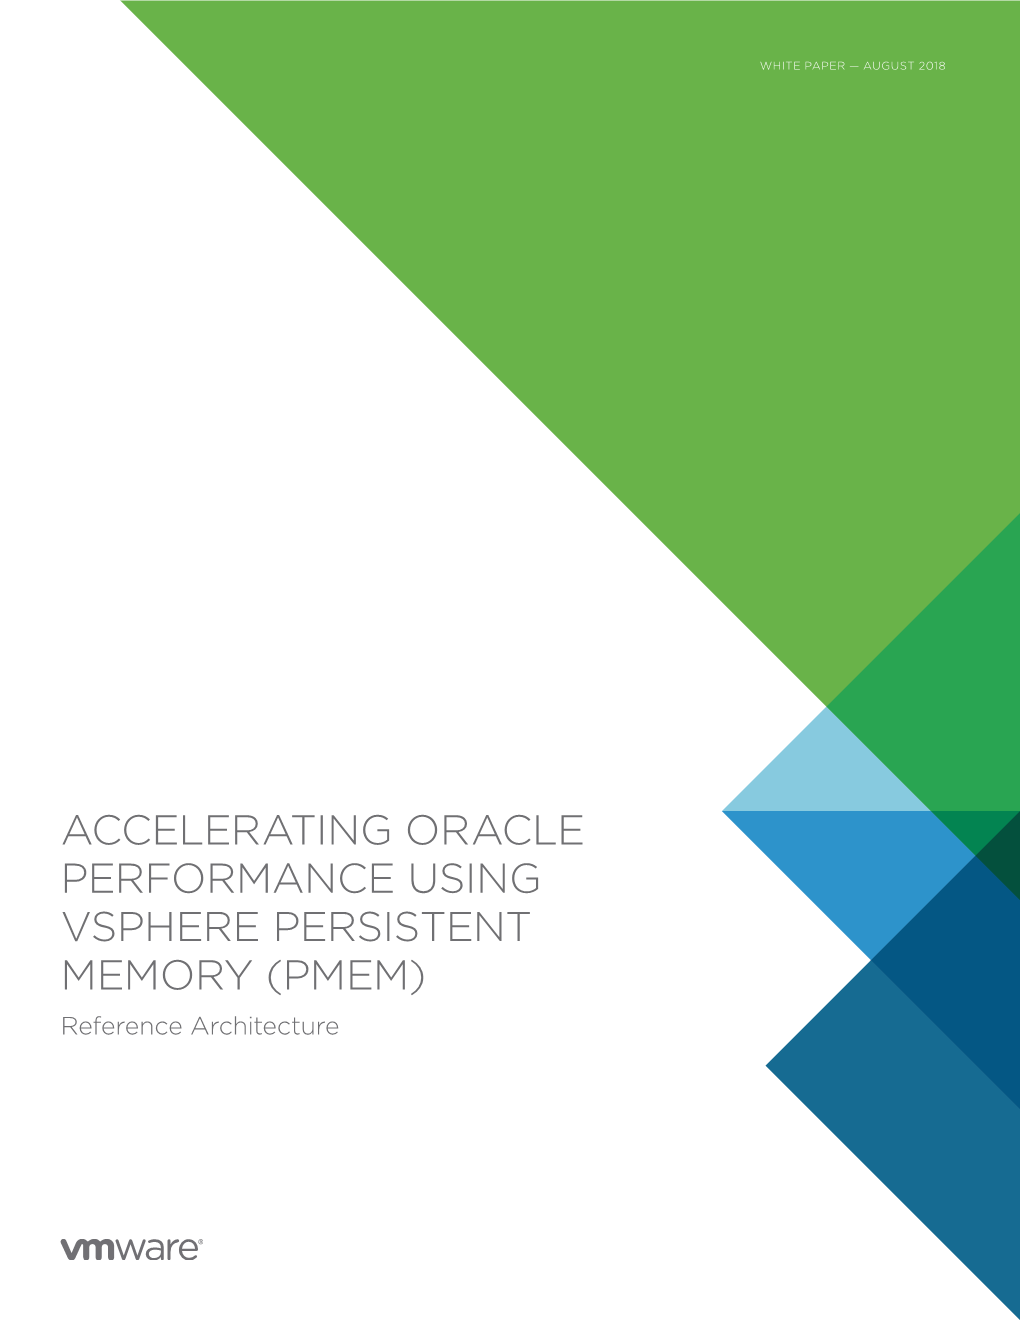 ACCELERATING ORACLE PERFORMANCE USING VSPHERE PERSISTENT MEMORY (PMEM) Reference Architecture ACCELERATING ORACLE PERFORMANCE USING VSPHERE PERSISTENT MEMORY